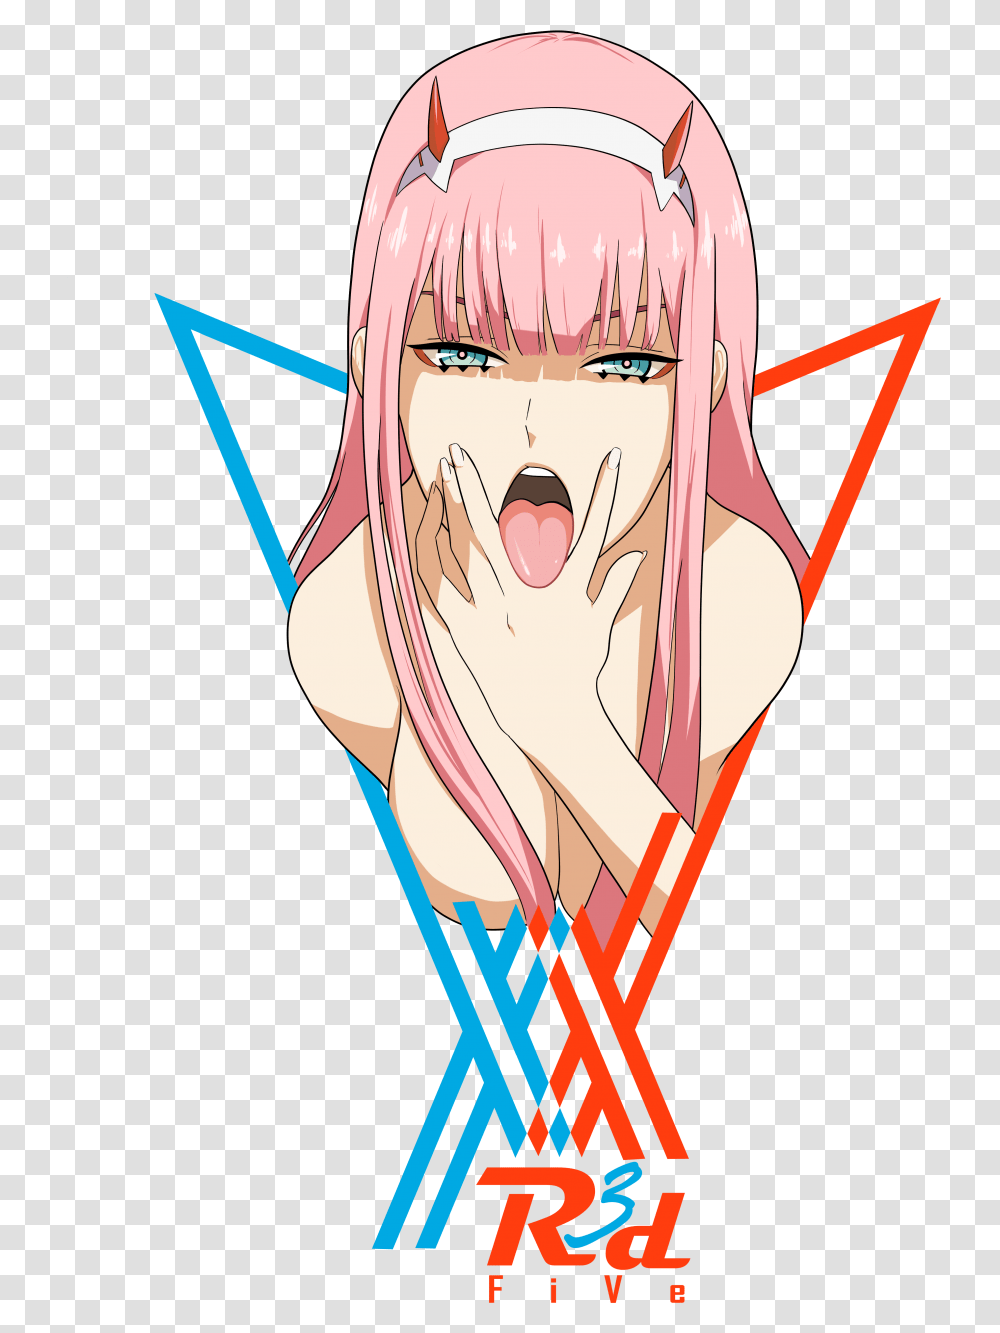 Zero Two Darling In The Franxx Drawn By R3dfive Danbooru Anime, Graphics, Art, Drawing, Helmet Transparent Png